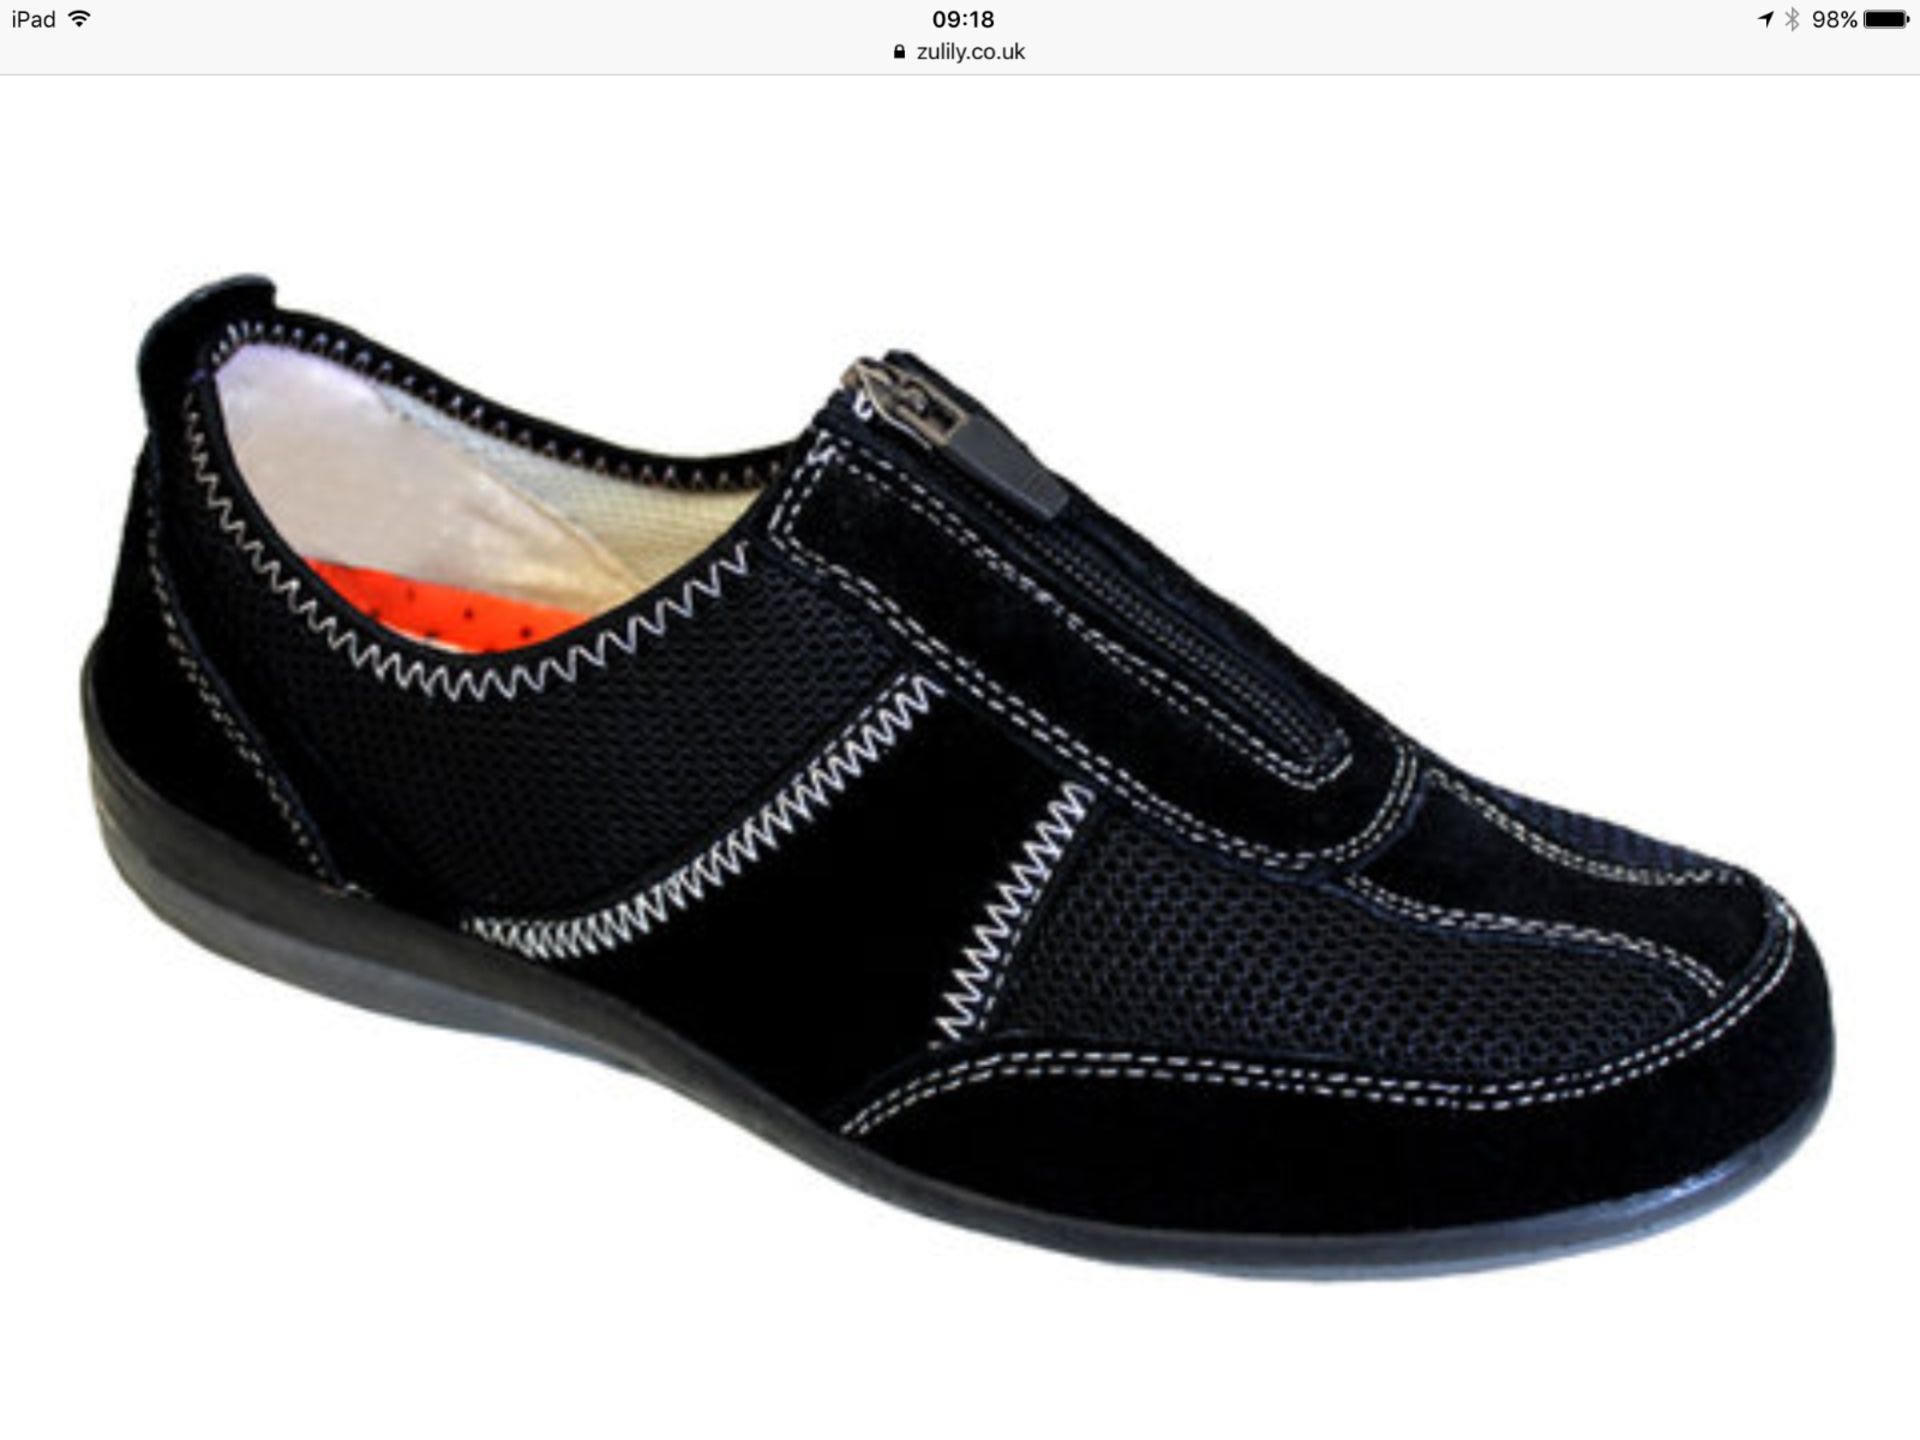 Comfort Life Black Zip-Front Leather Sneaker, Size Uk 4.5/Eur 37-38, Rrp £77.99 (New With Box) [Ref: